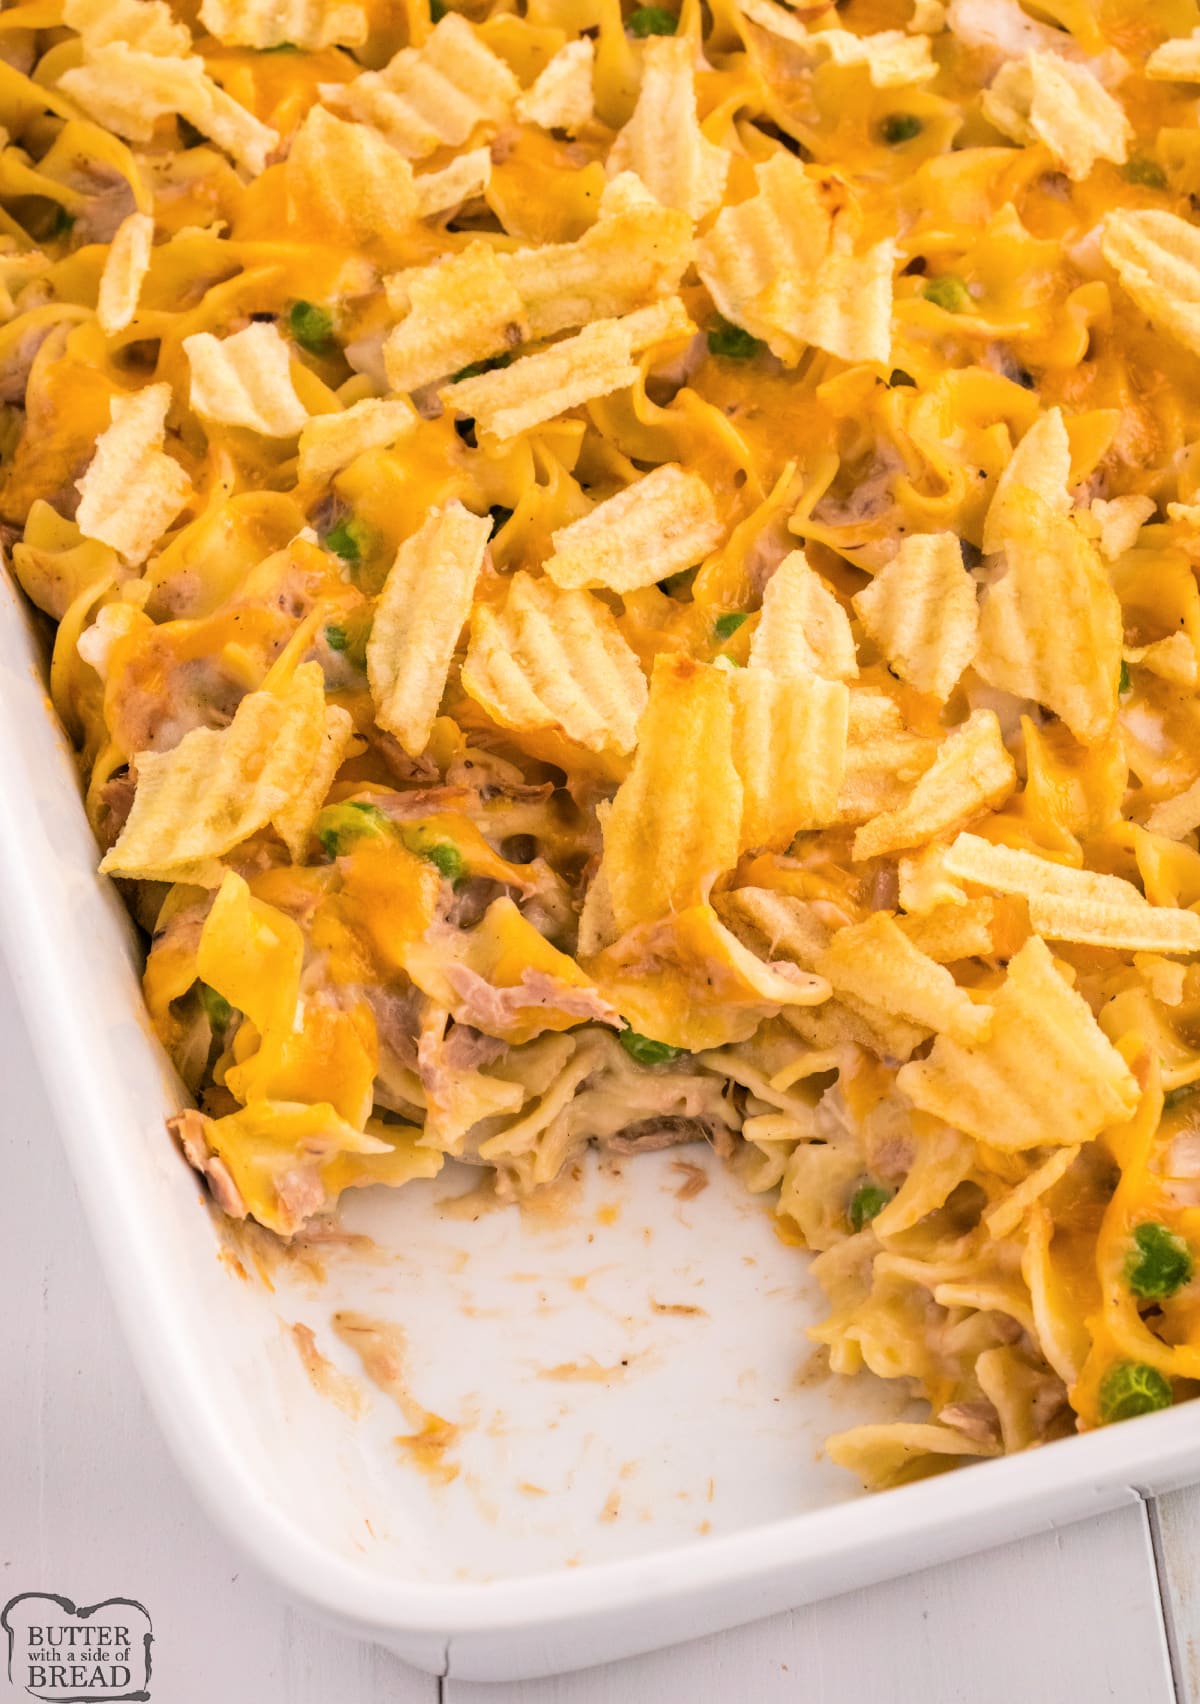 Tuna Noodle Casserole is the perfect comfort food recipe for a weekday dinner. This tuna casserole recipe is topped with cheese and crushed potato chips.